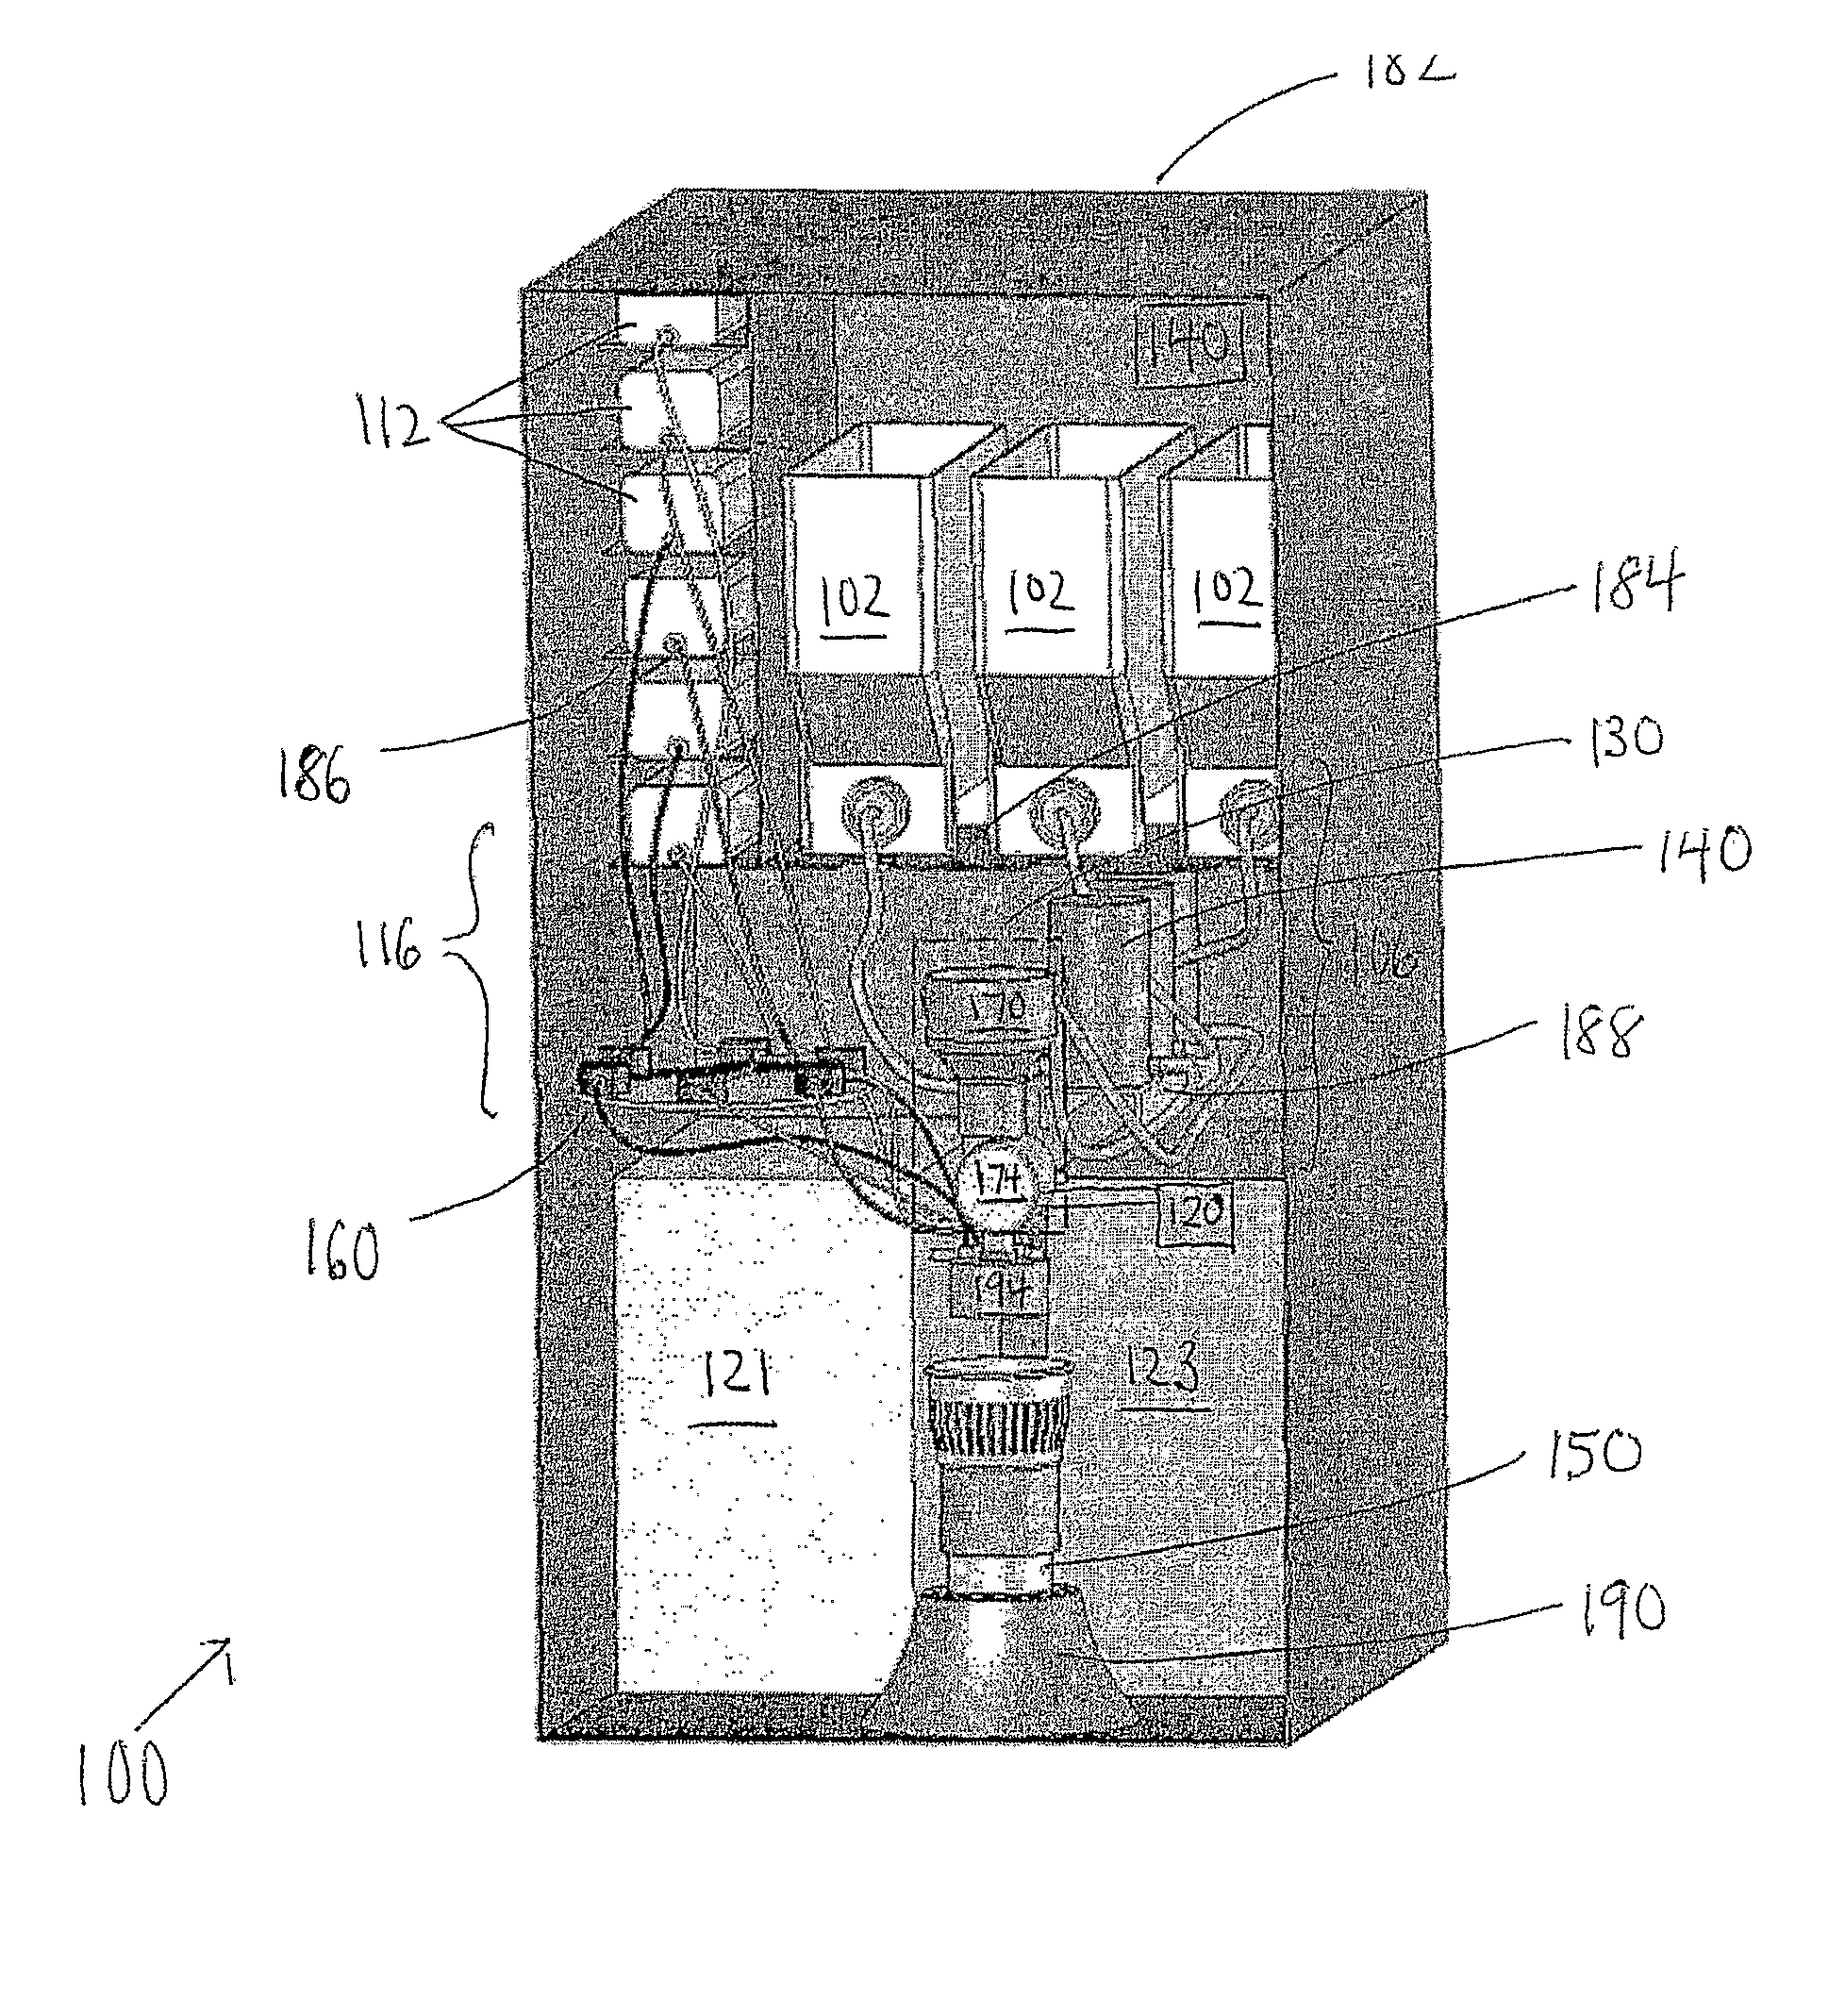 Method For Delivering Hot And Cold Beverages On Demand In A Variety Of Flavorings And Nutritional Additives